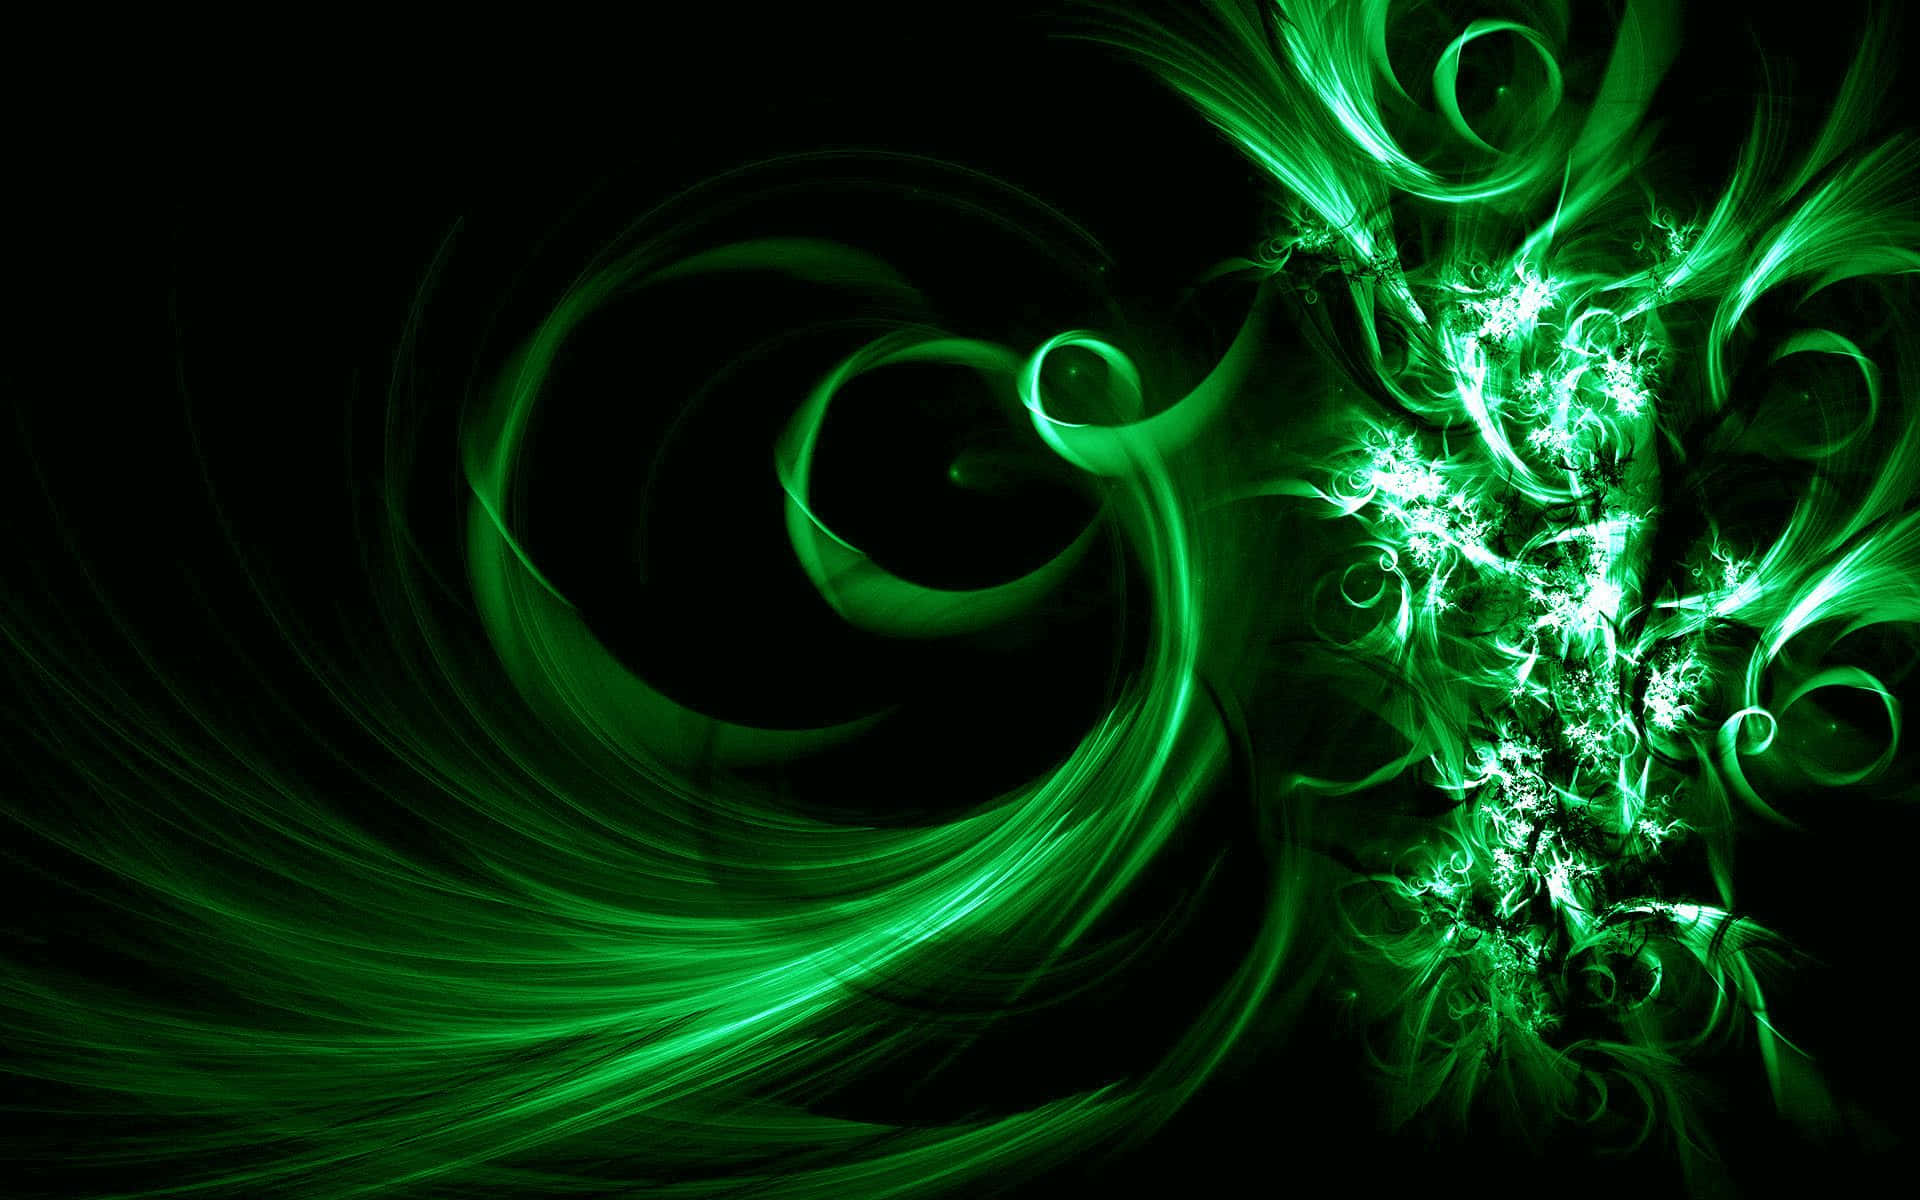 Abstract Dark Green and Black Background